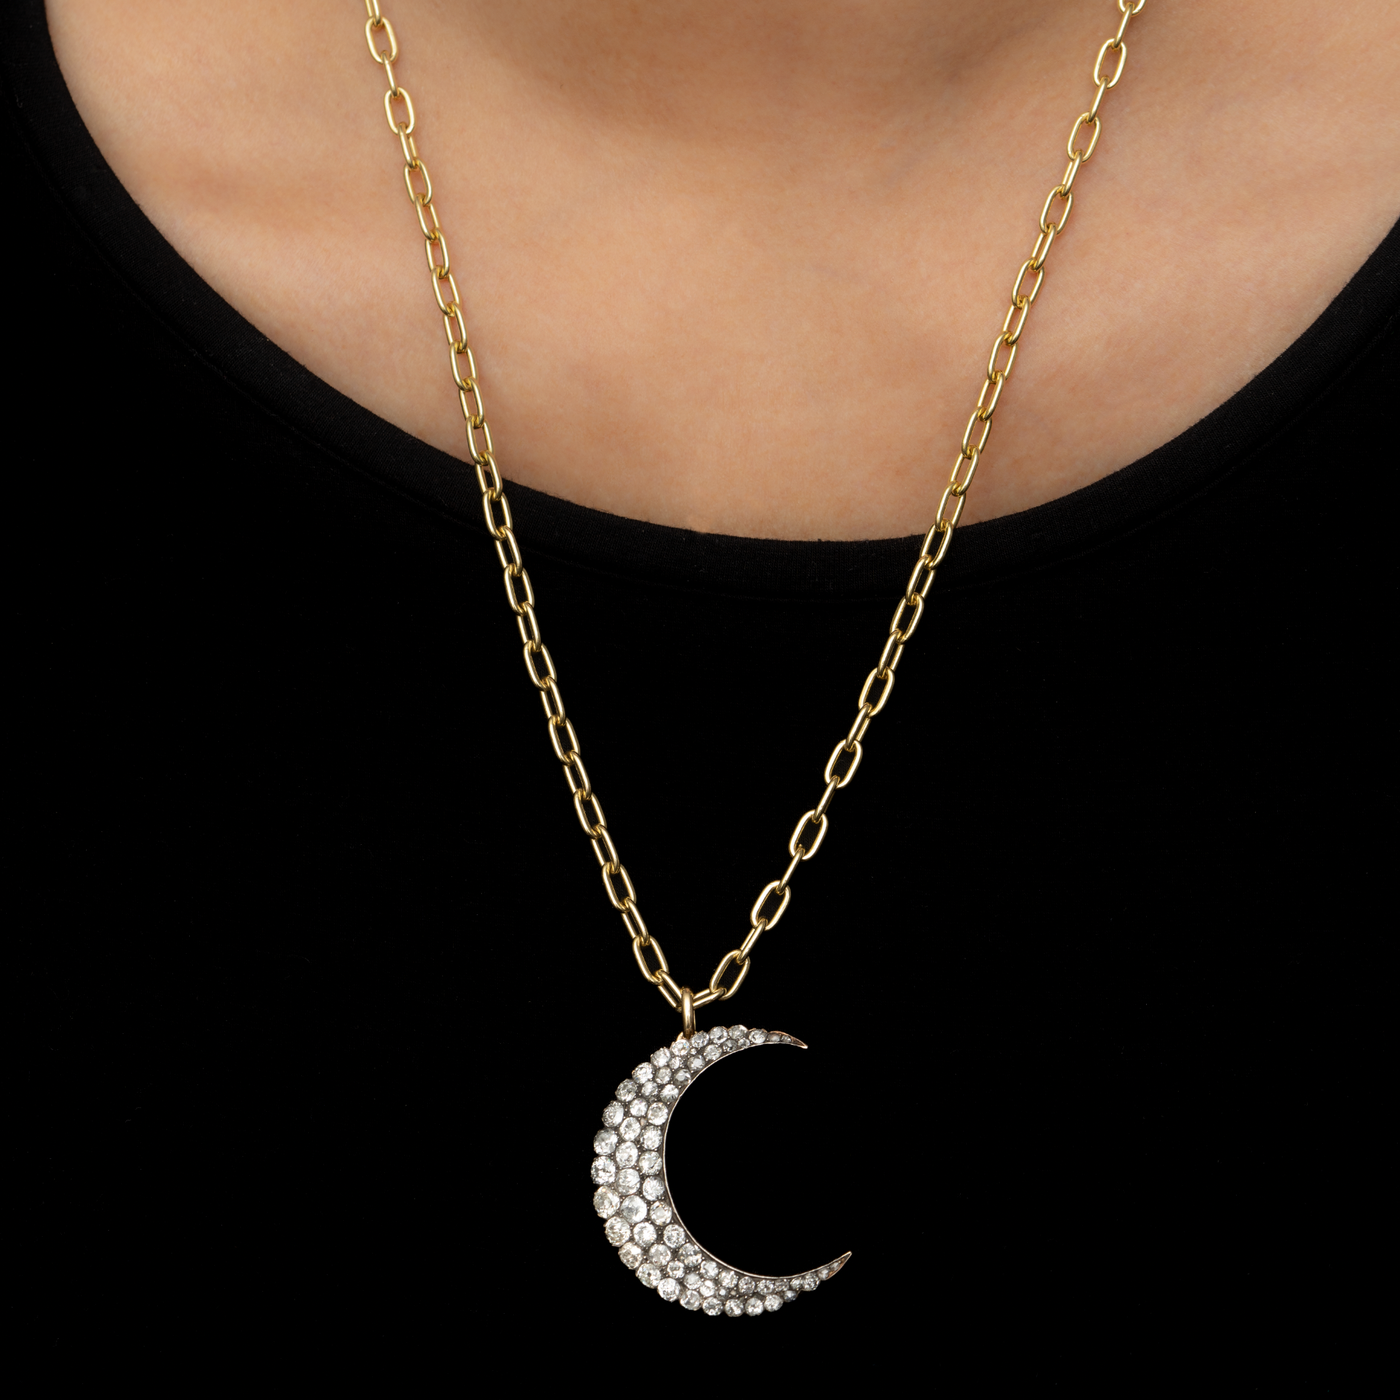 VICTORIAN 18K YELLOW GOLD, SILVER AND 7.25CTS. DIAMOND CRESCENT MOON c.1860s